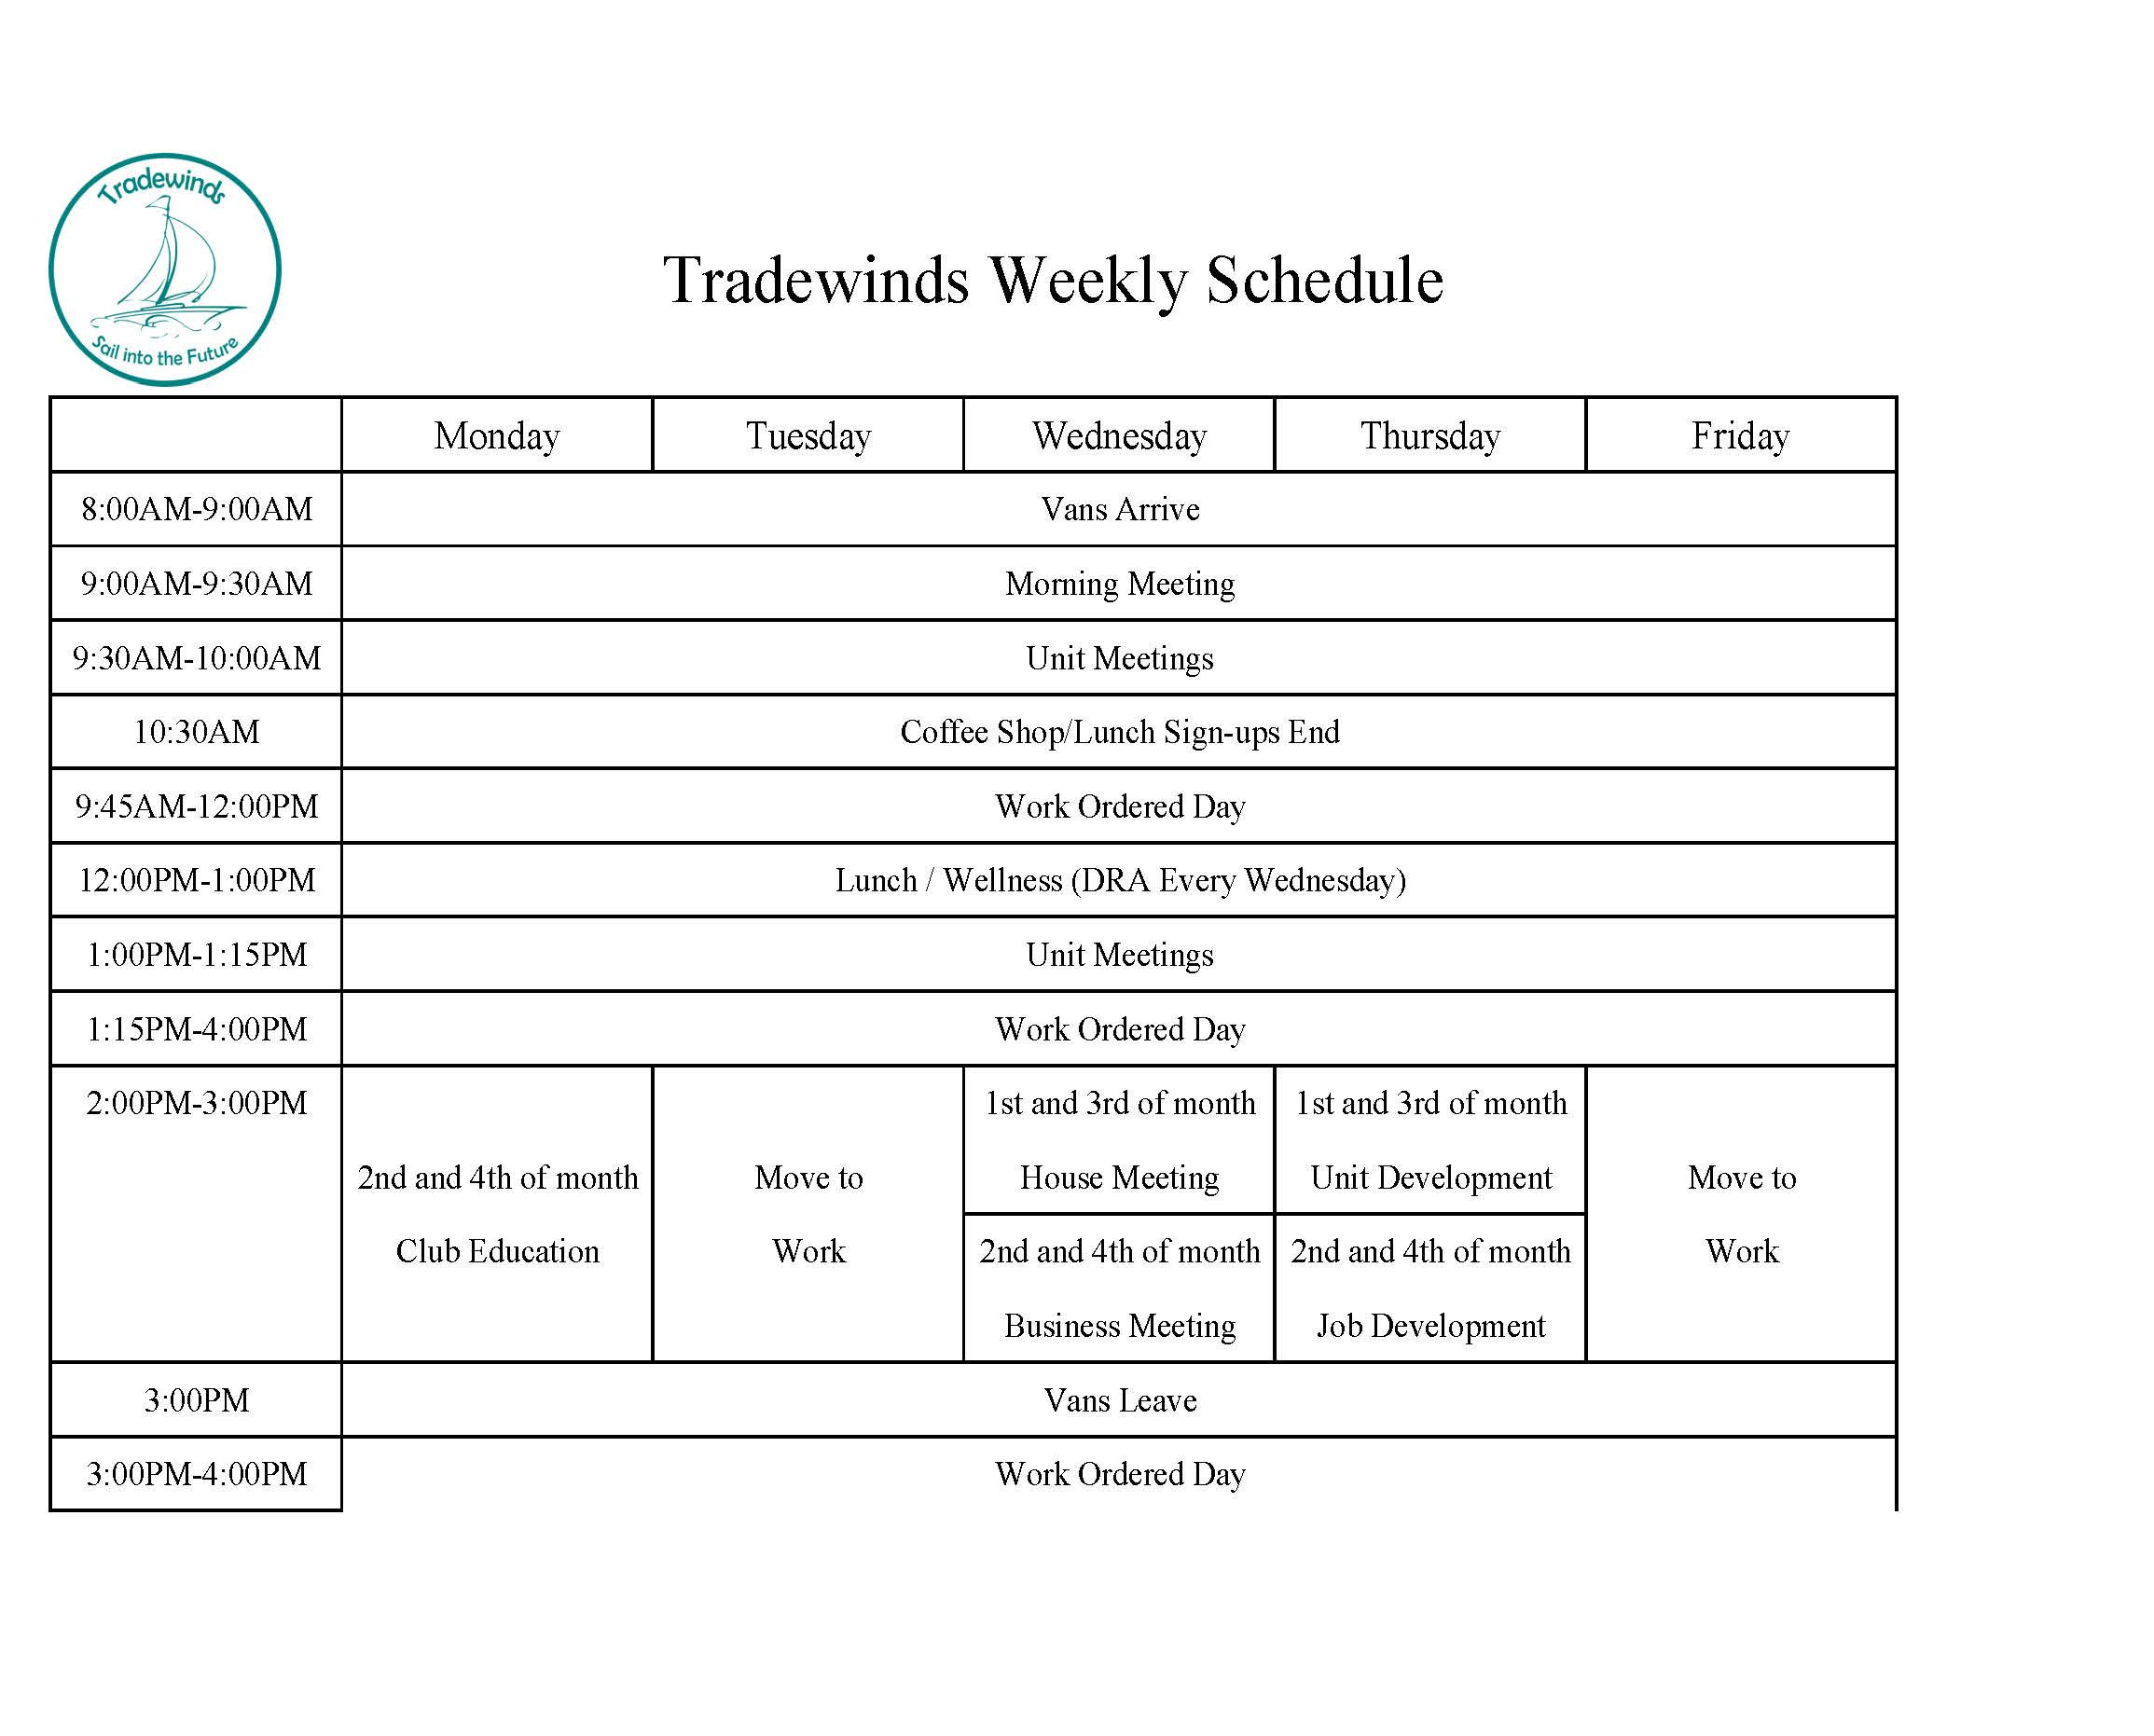 An image of the Tradewinds weekly schedule in black text.